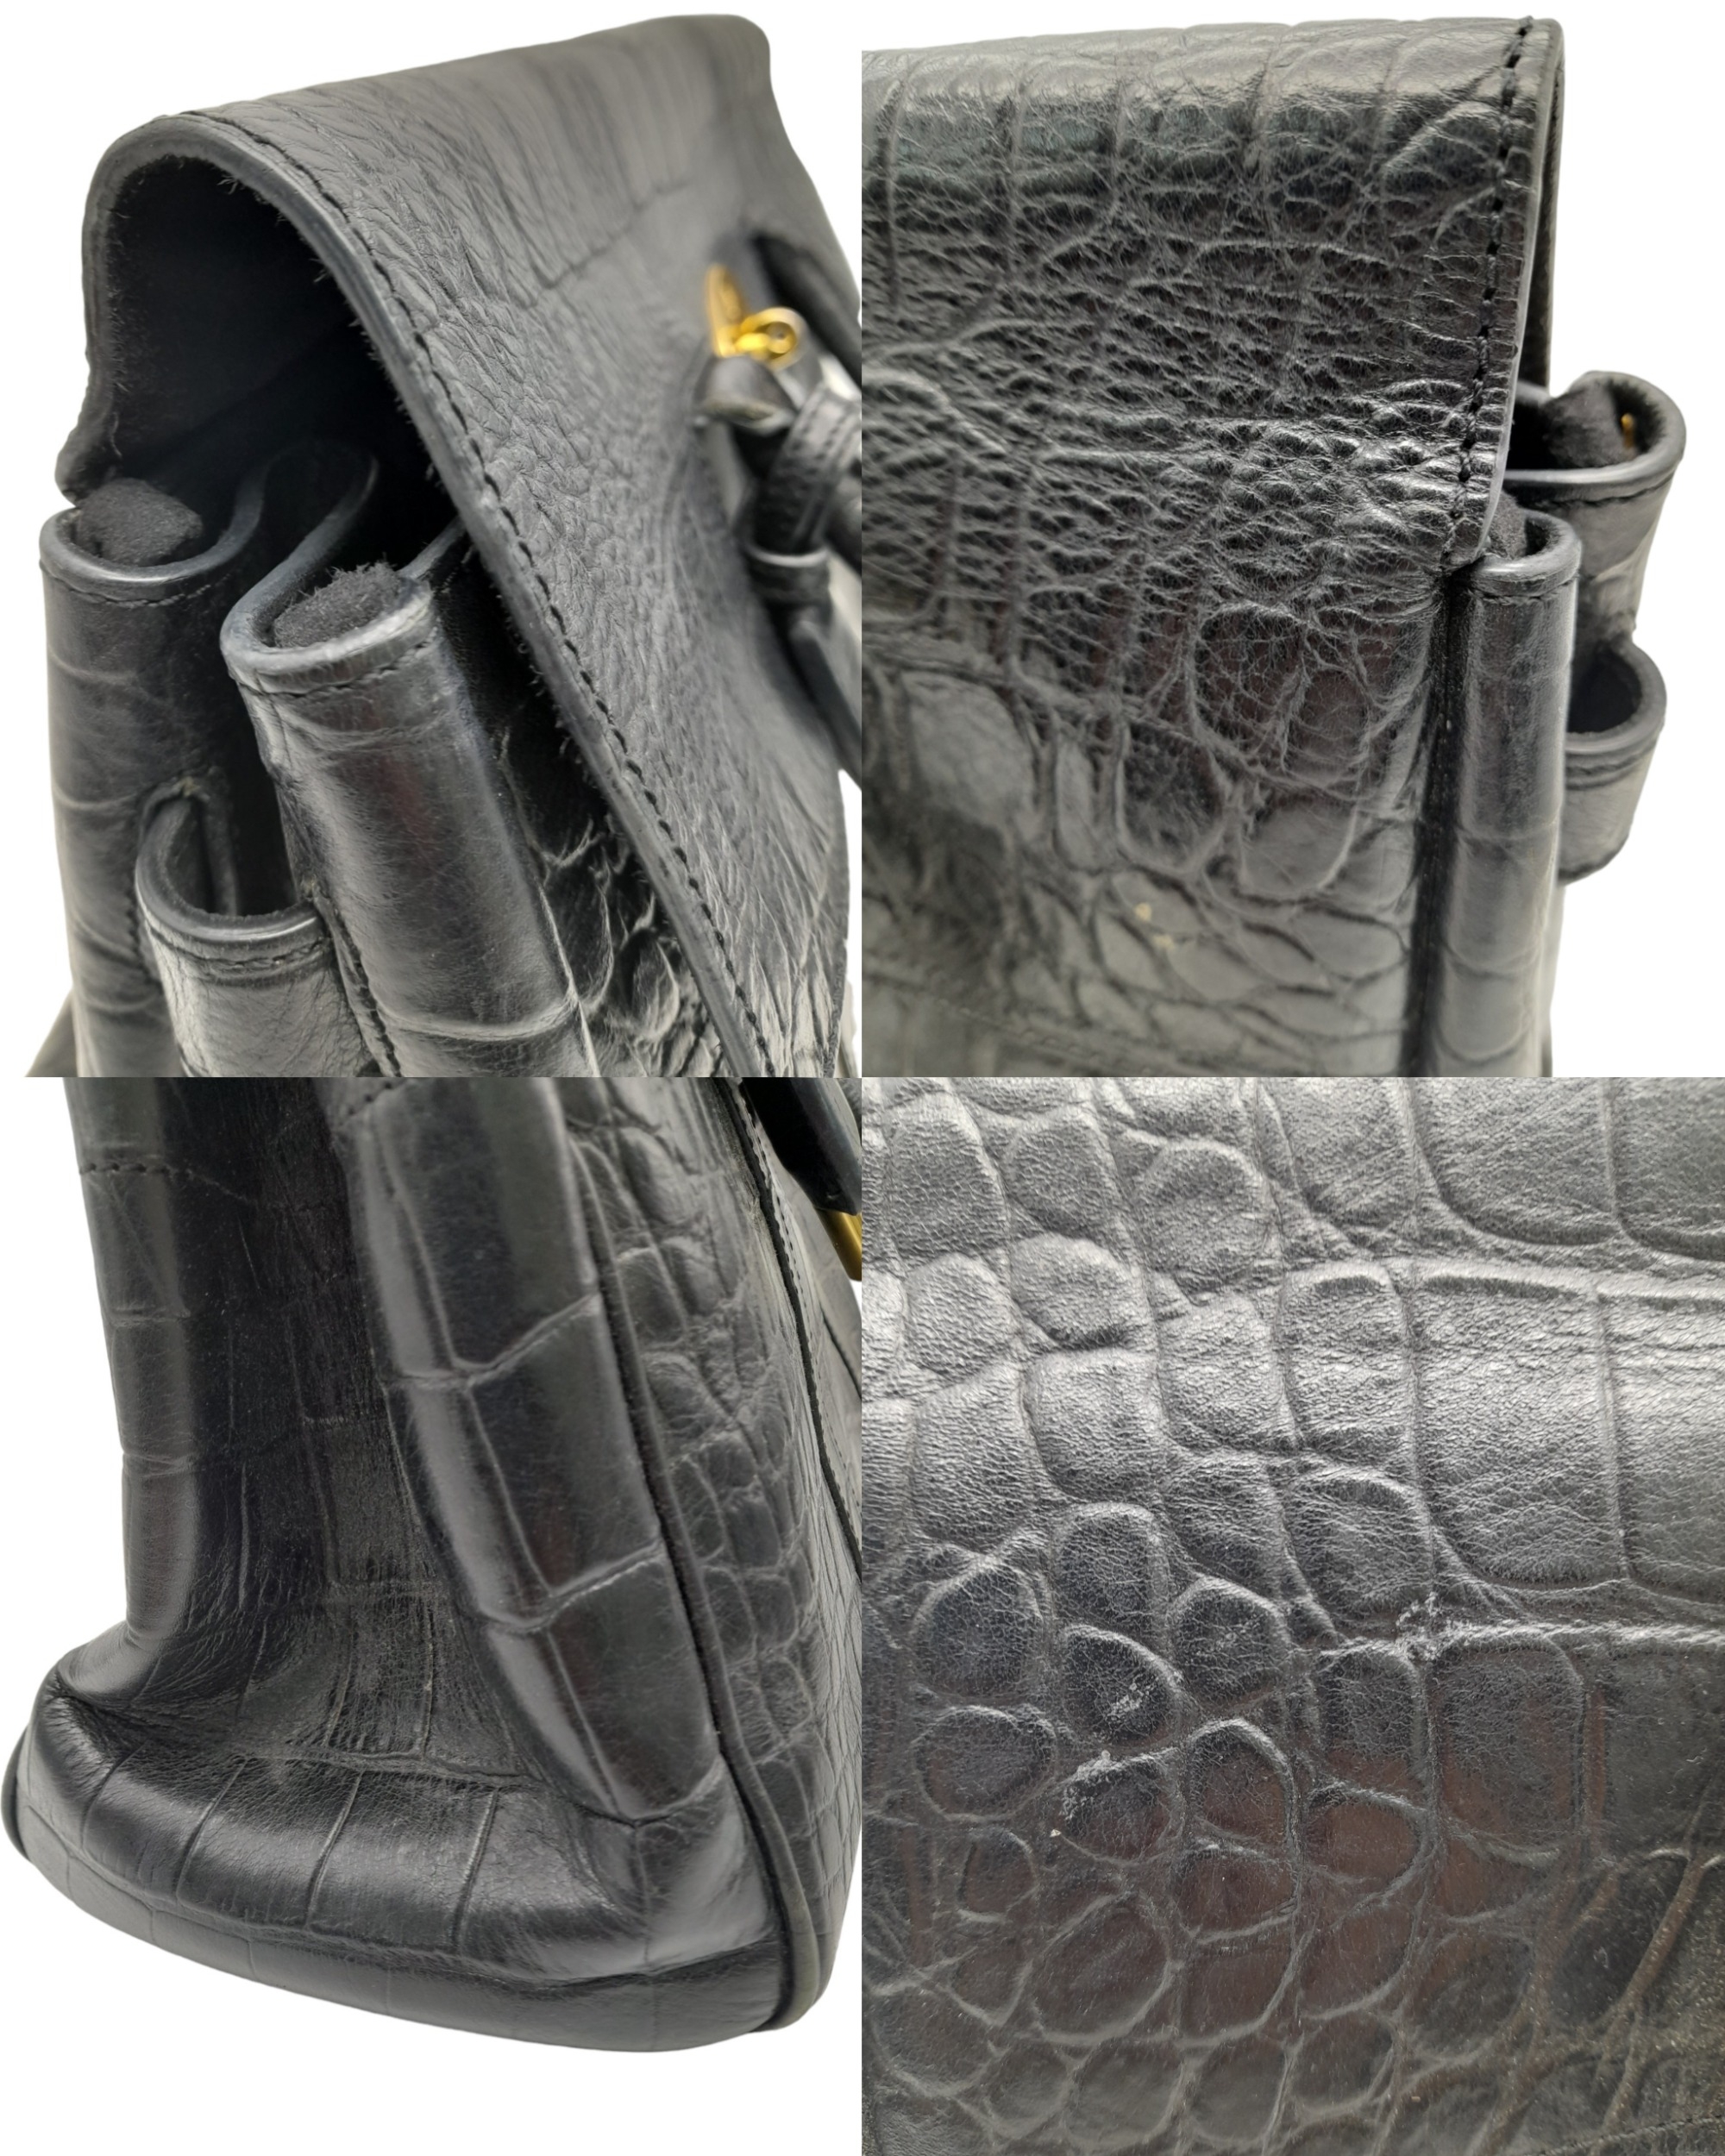 A Mulberry Bayswater Handbag. Black Croc Embossed Leather exterior, gold-tone hardware, a clochette, - Image 6 of 7